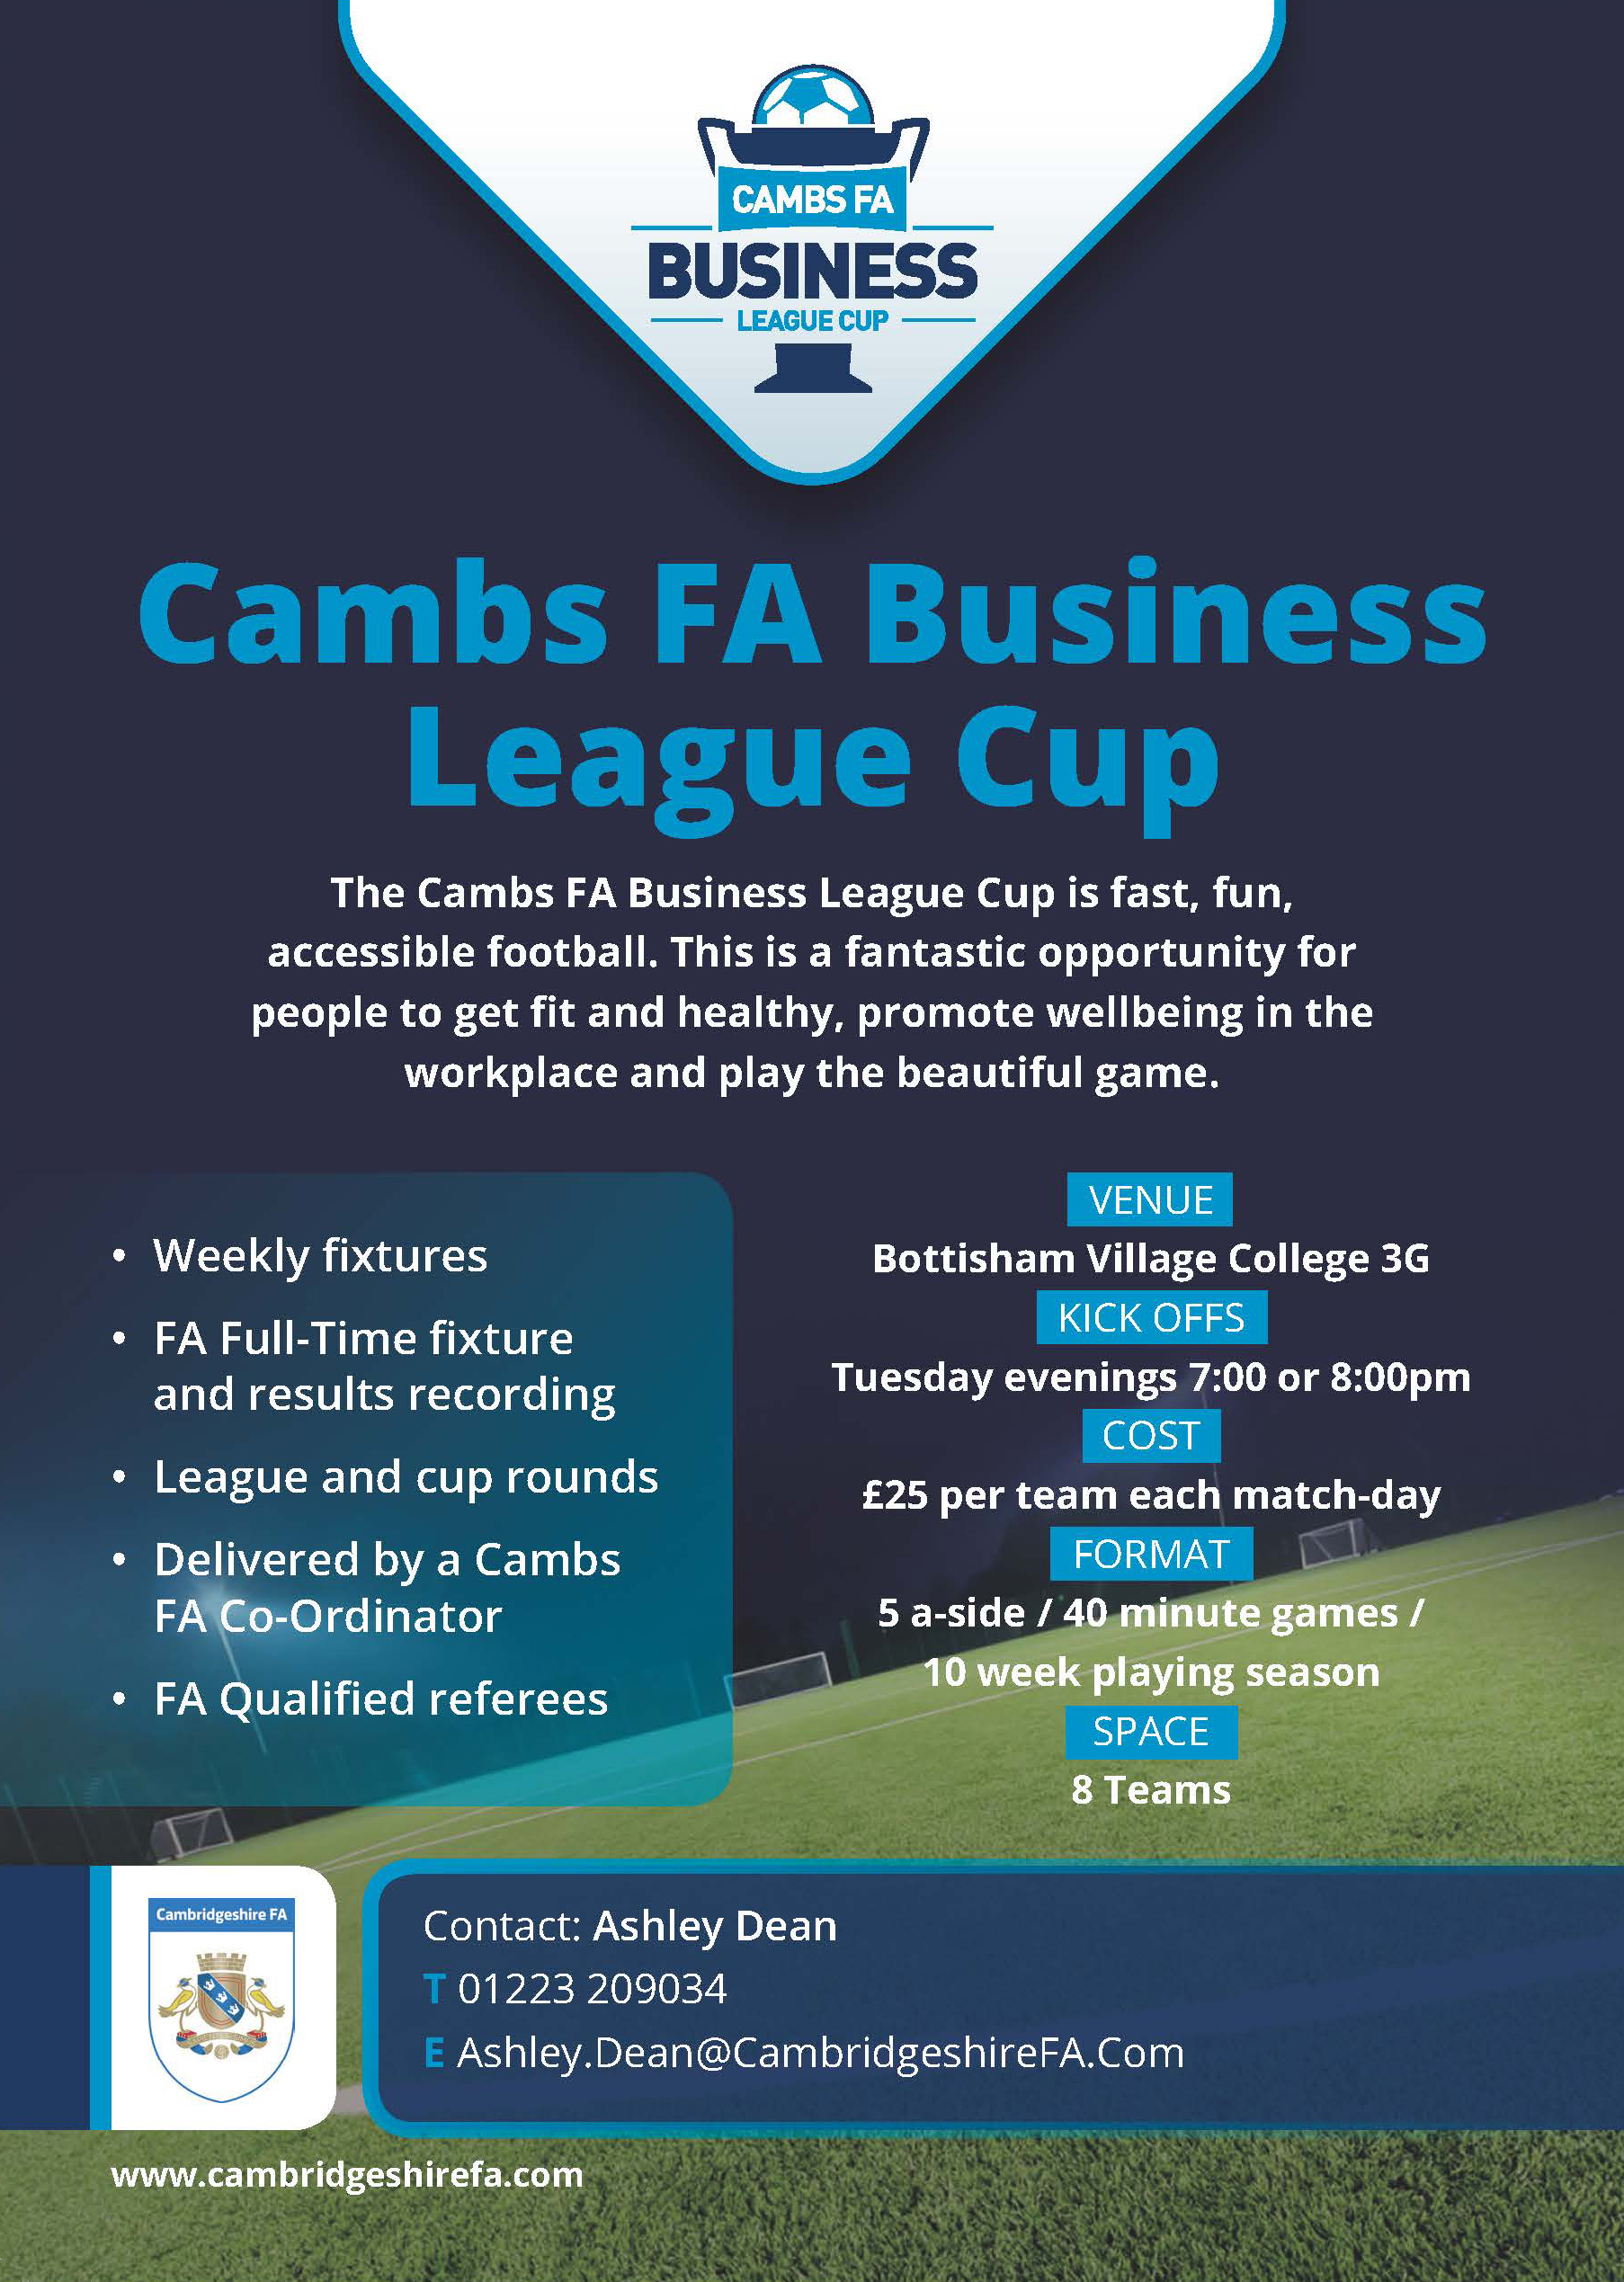 Cambs FA Business League Cup at Bottisham 3G